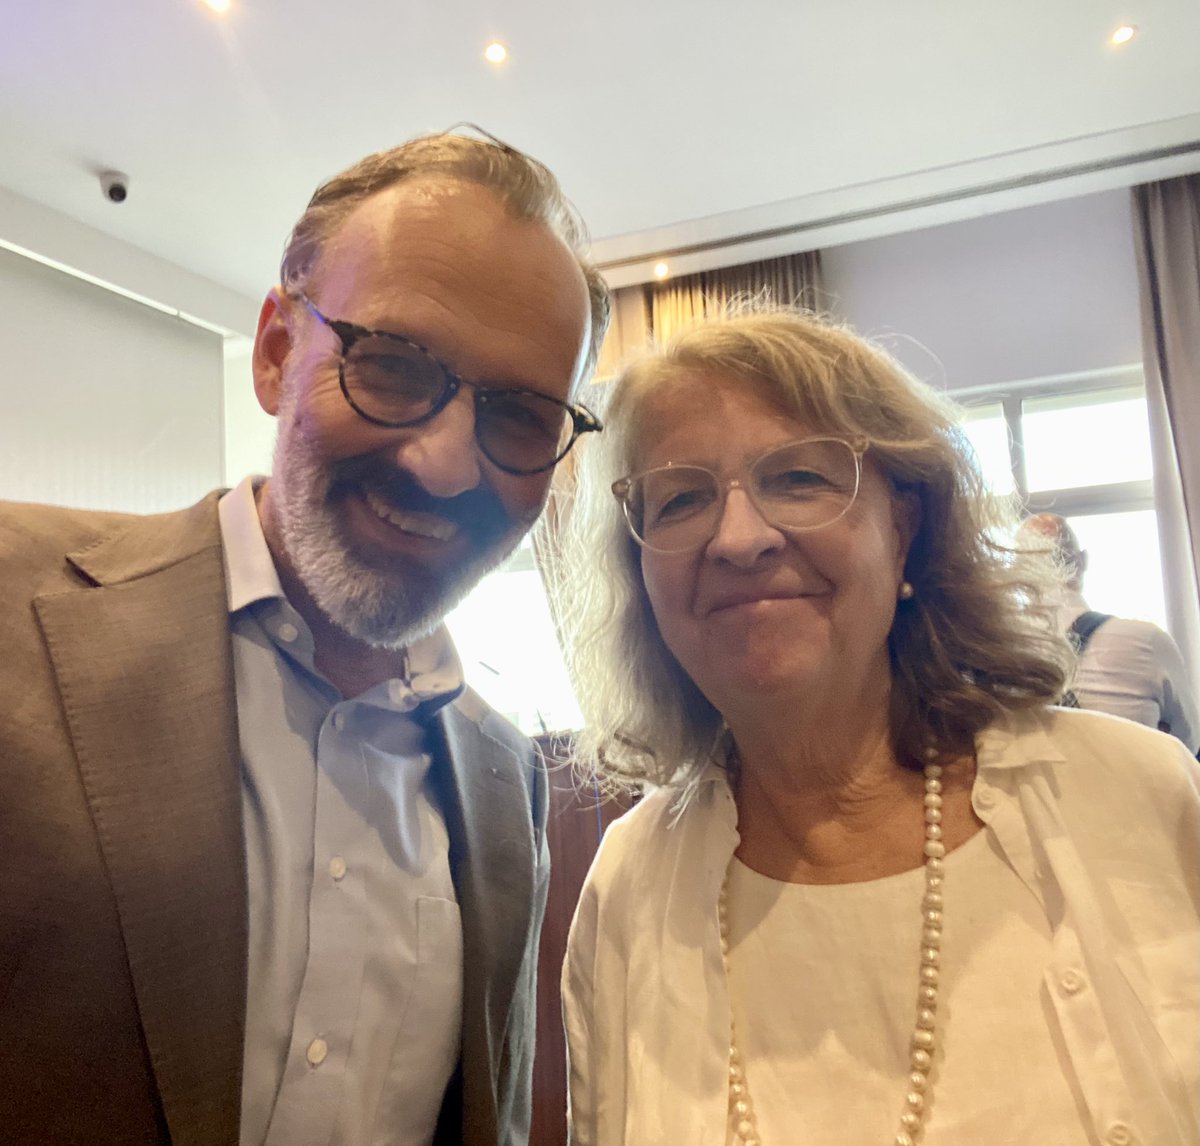 Great to meet one of my predecessors, Ambassador Lena Nordström, at the regional Africa HoMs meeting in Kigali this week! I promised to pass on greetings to her friends in 🇿🇲!